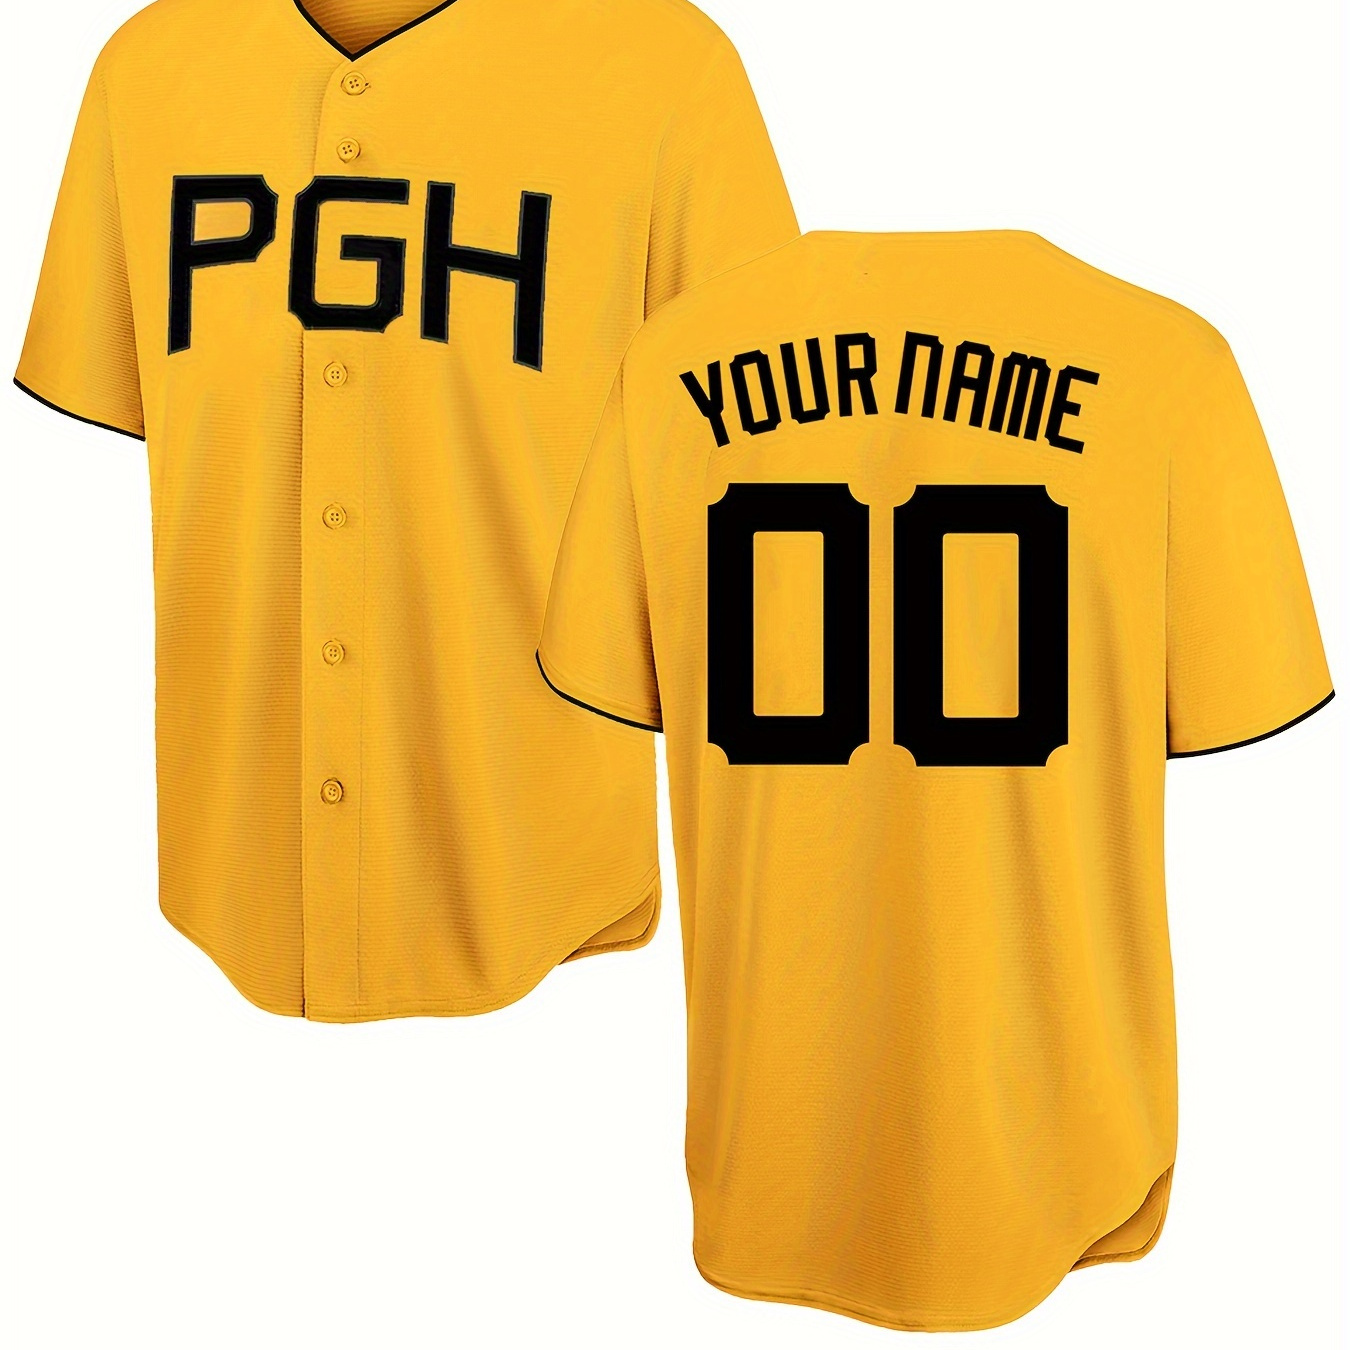 

Custom Men's Baseball Jersey, Personalized Embroidered Team Name "pgh" And Your Number, Sport Style, Comfort Fit Leisurewear